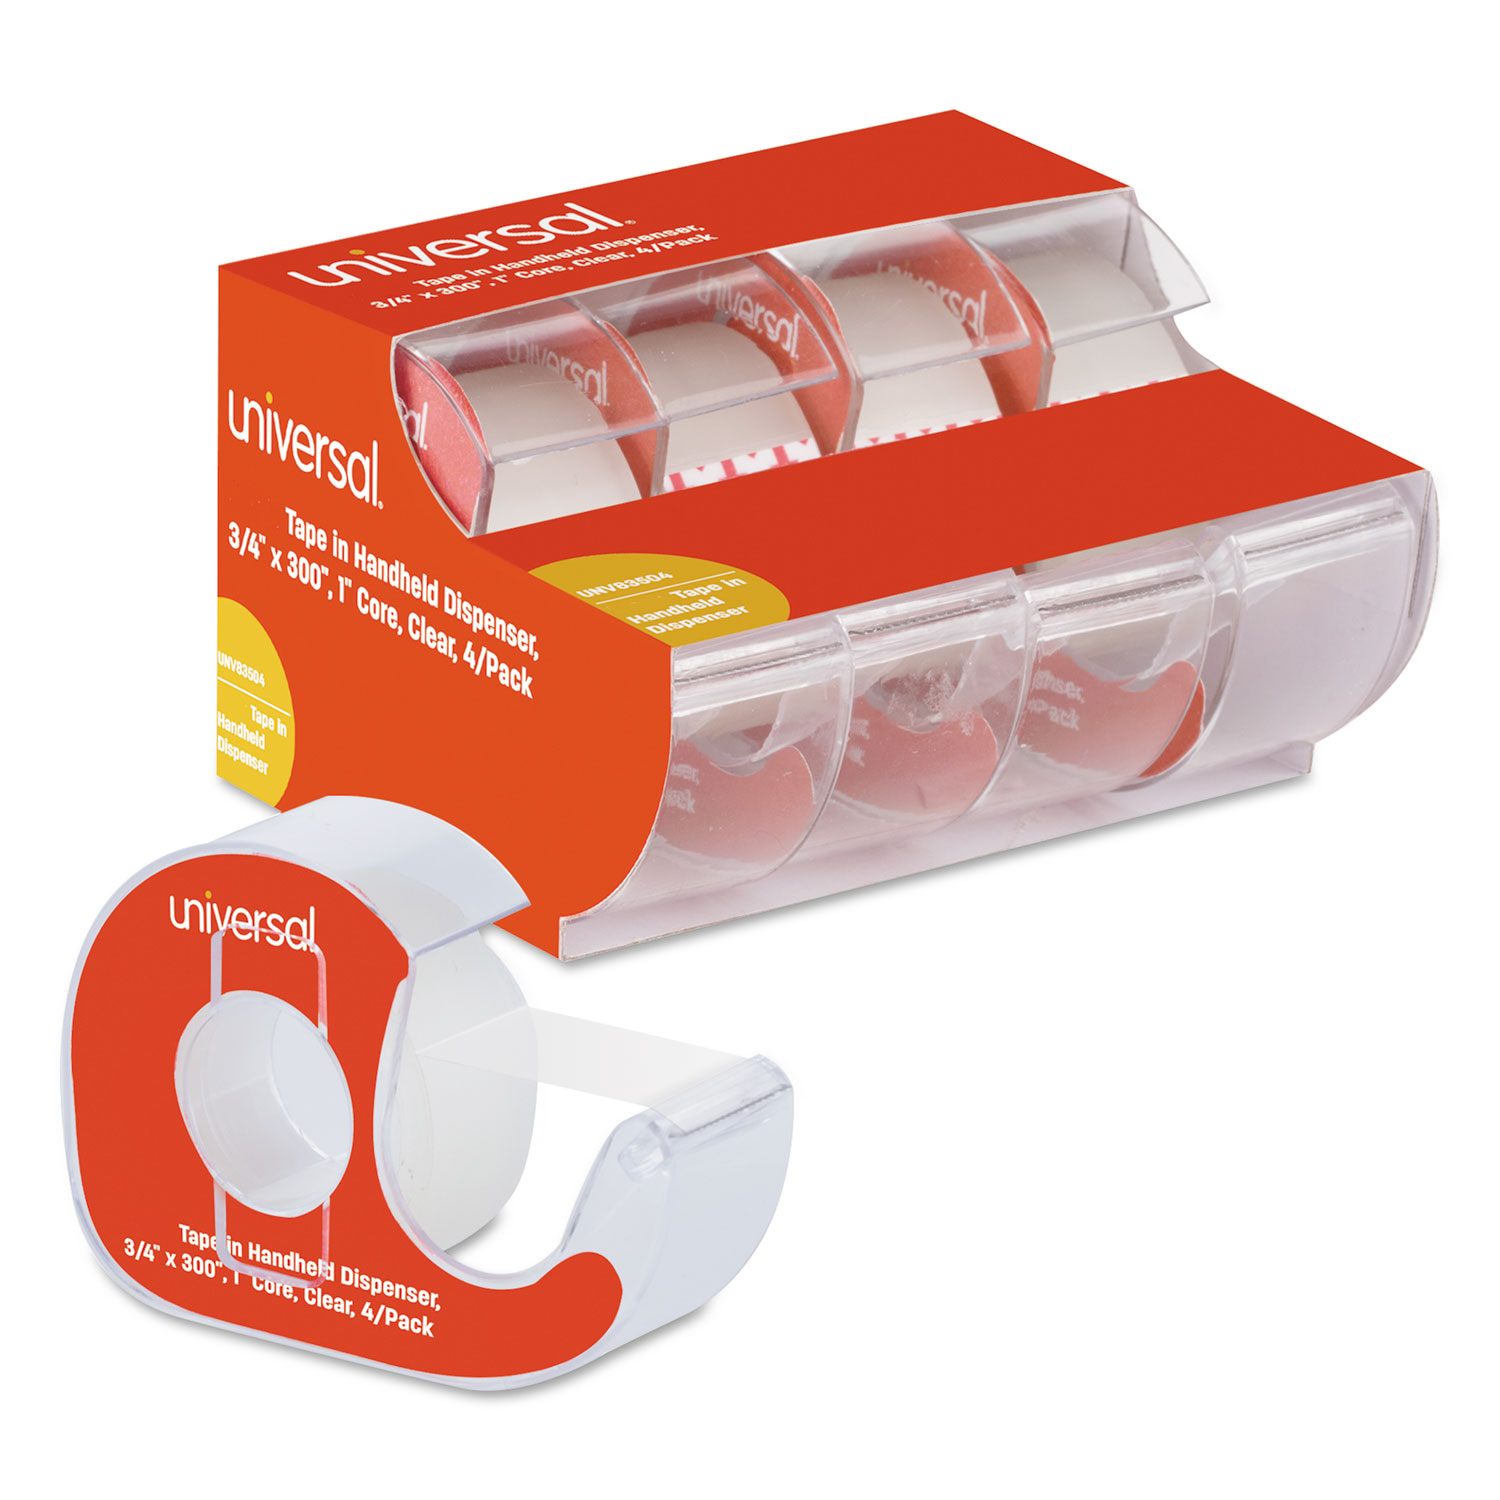  Universal UNV83504 Invisible Tape with Handheld Dispenser, 1 Core, 0.75 x 25 ft, Clear, 4/Pack (UNV83504) 